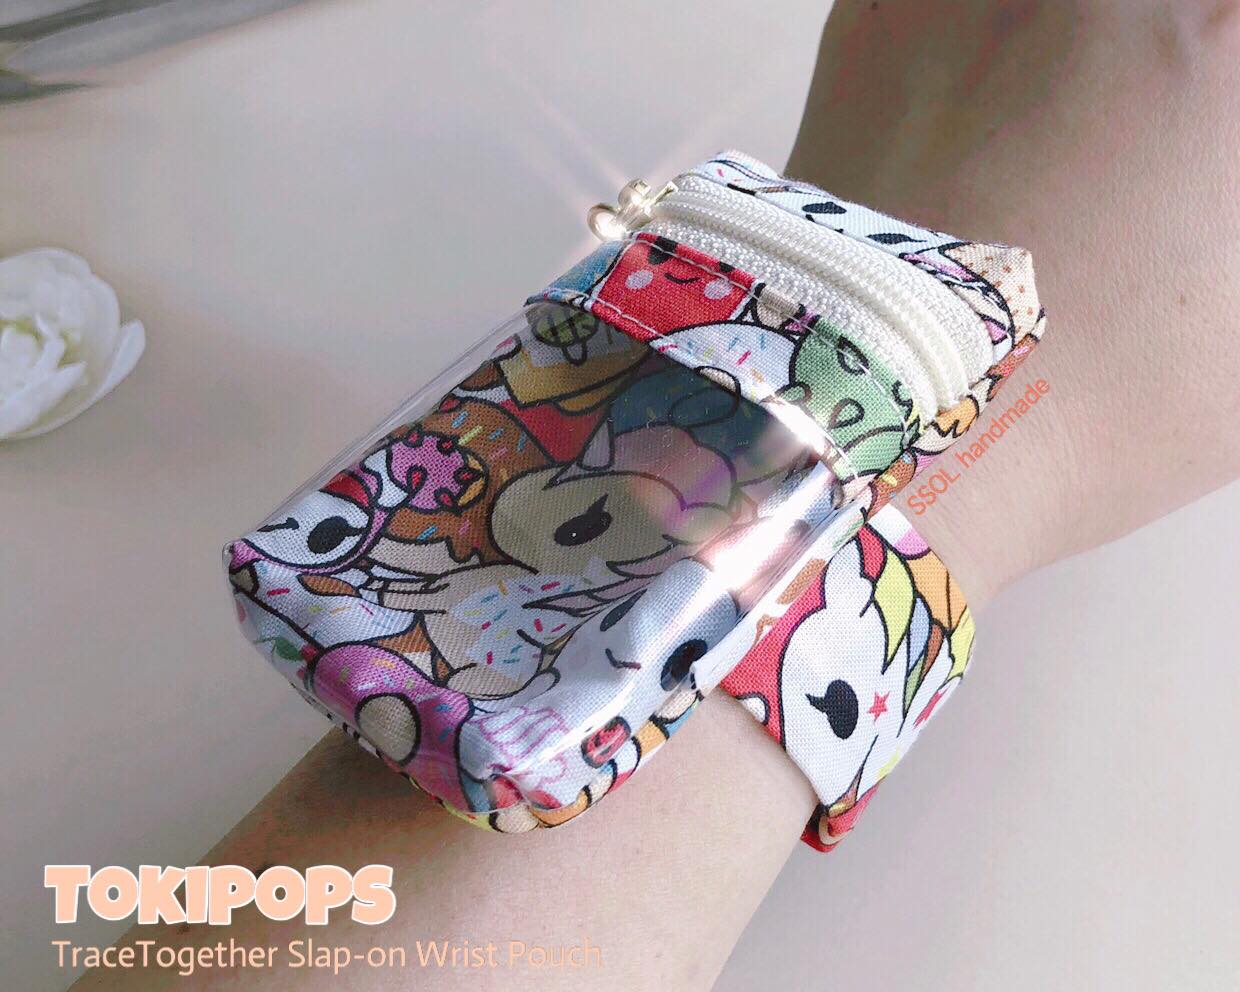 SG TraceTogether Wrist Pouch - Tokipops